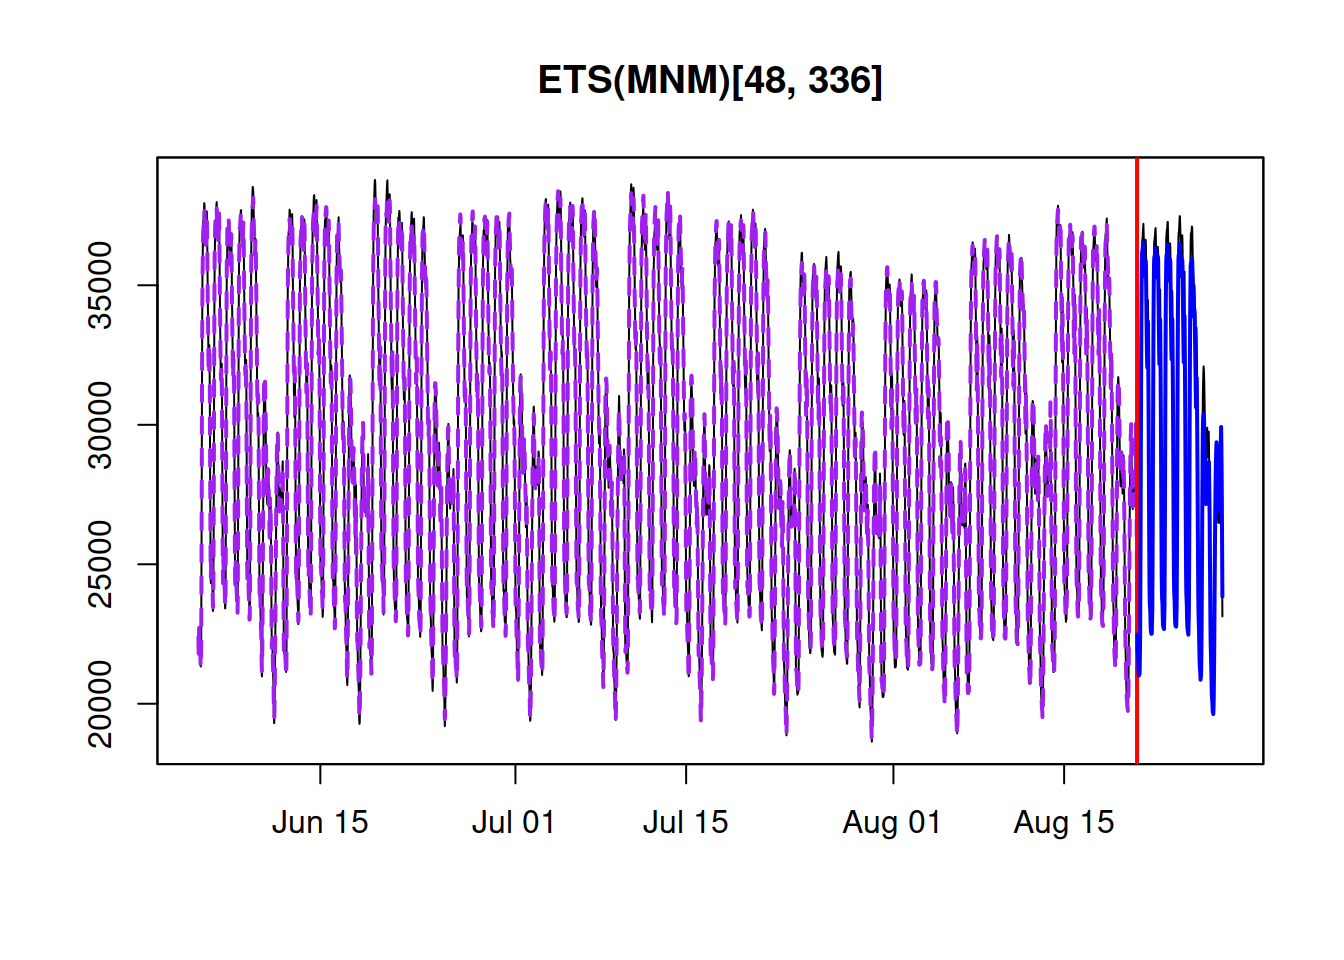 The fit and the forecast of the ETS(M,N,M)[48,336] model on half-hourly electricity demand data.